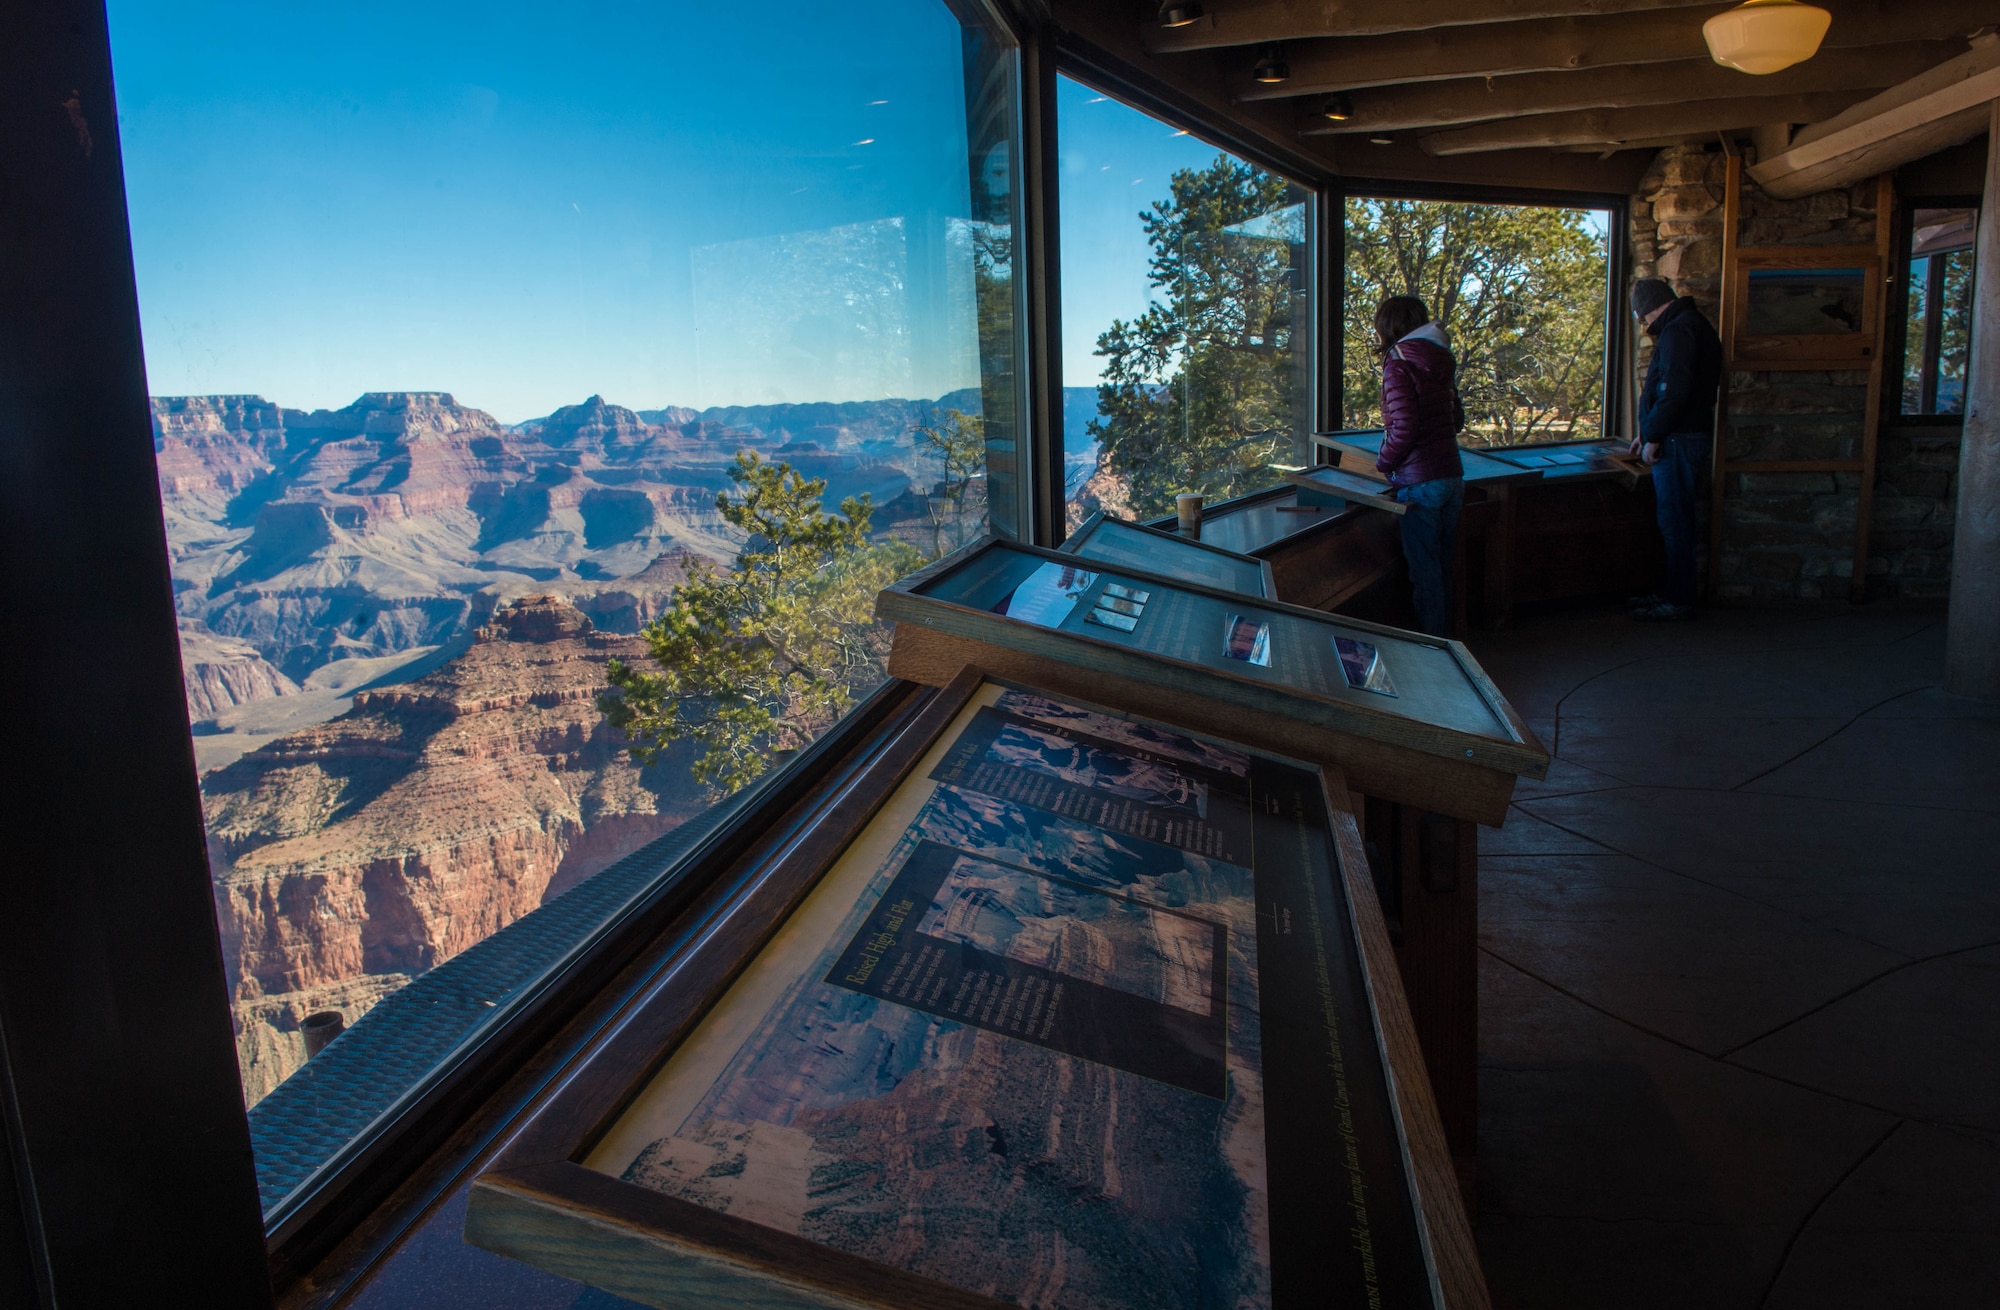 Visitors interact with various maps and documentation in the Yavapi Point Geology Museum in Grand Canyon National Park, Ariz., Jan. 27, 2018. Grand Canyon National Park offers a multitude of educational and historical opportunities for Airmen stationed at Luke Air Force Base to learn about southwest heritage and culture. (U.S. Air Force photo/Airman 1st Class Caleb Worpel)